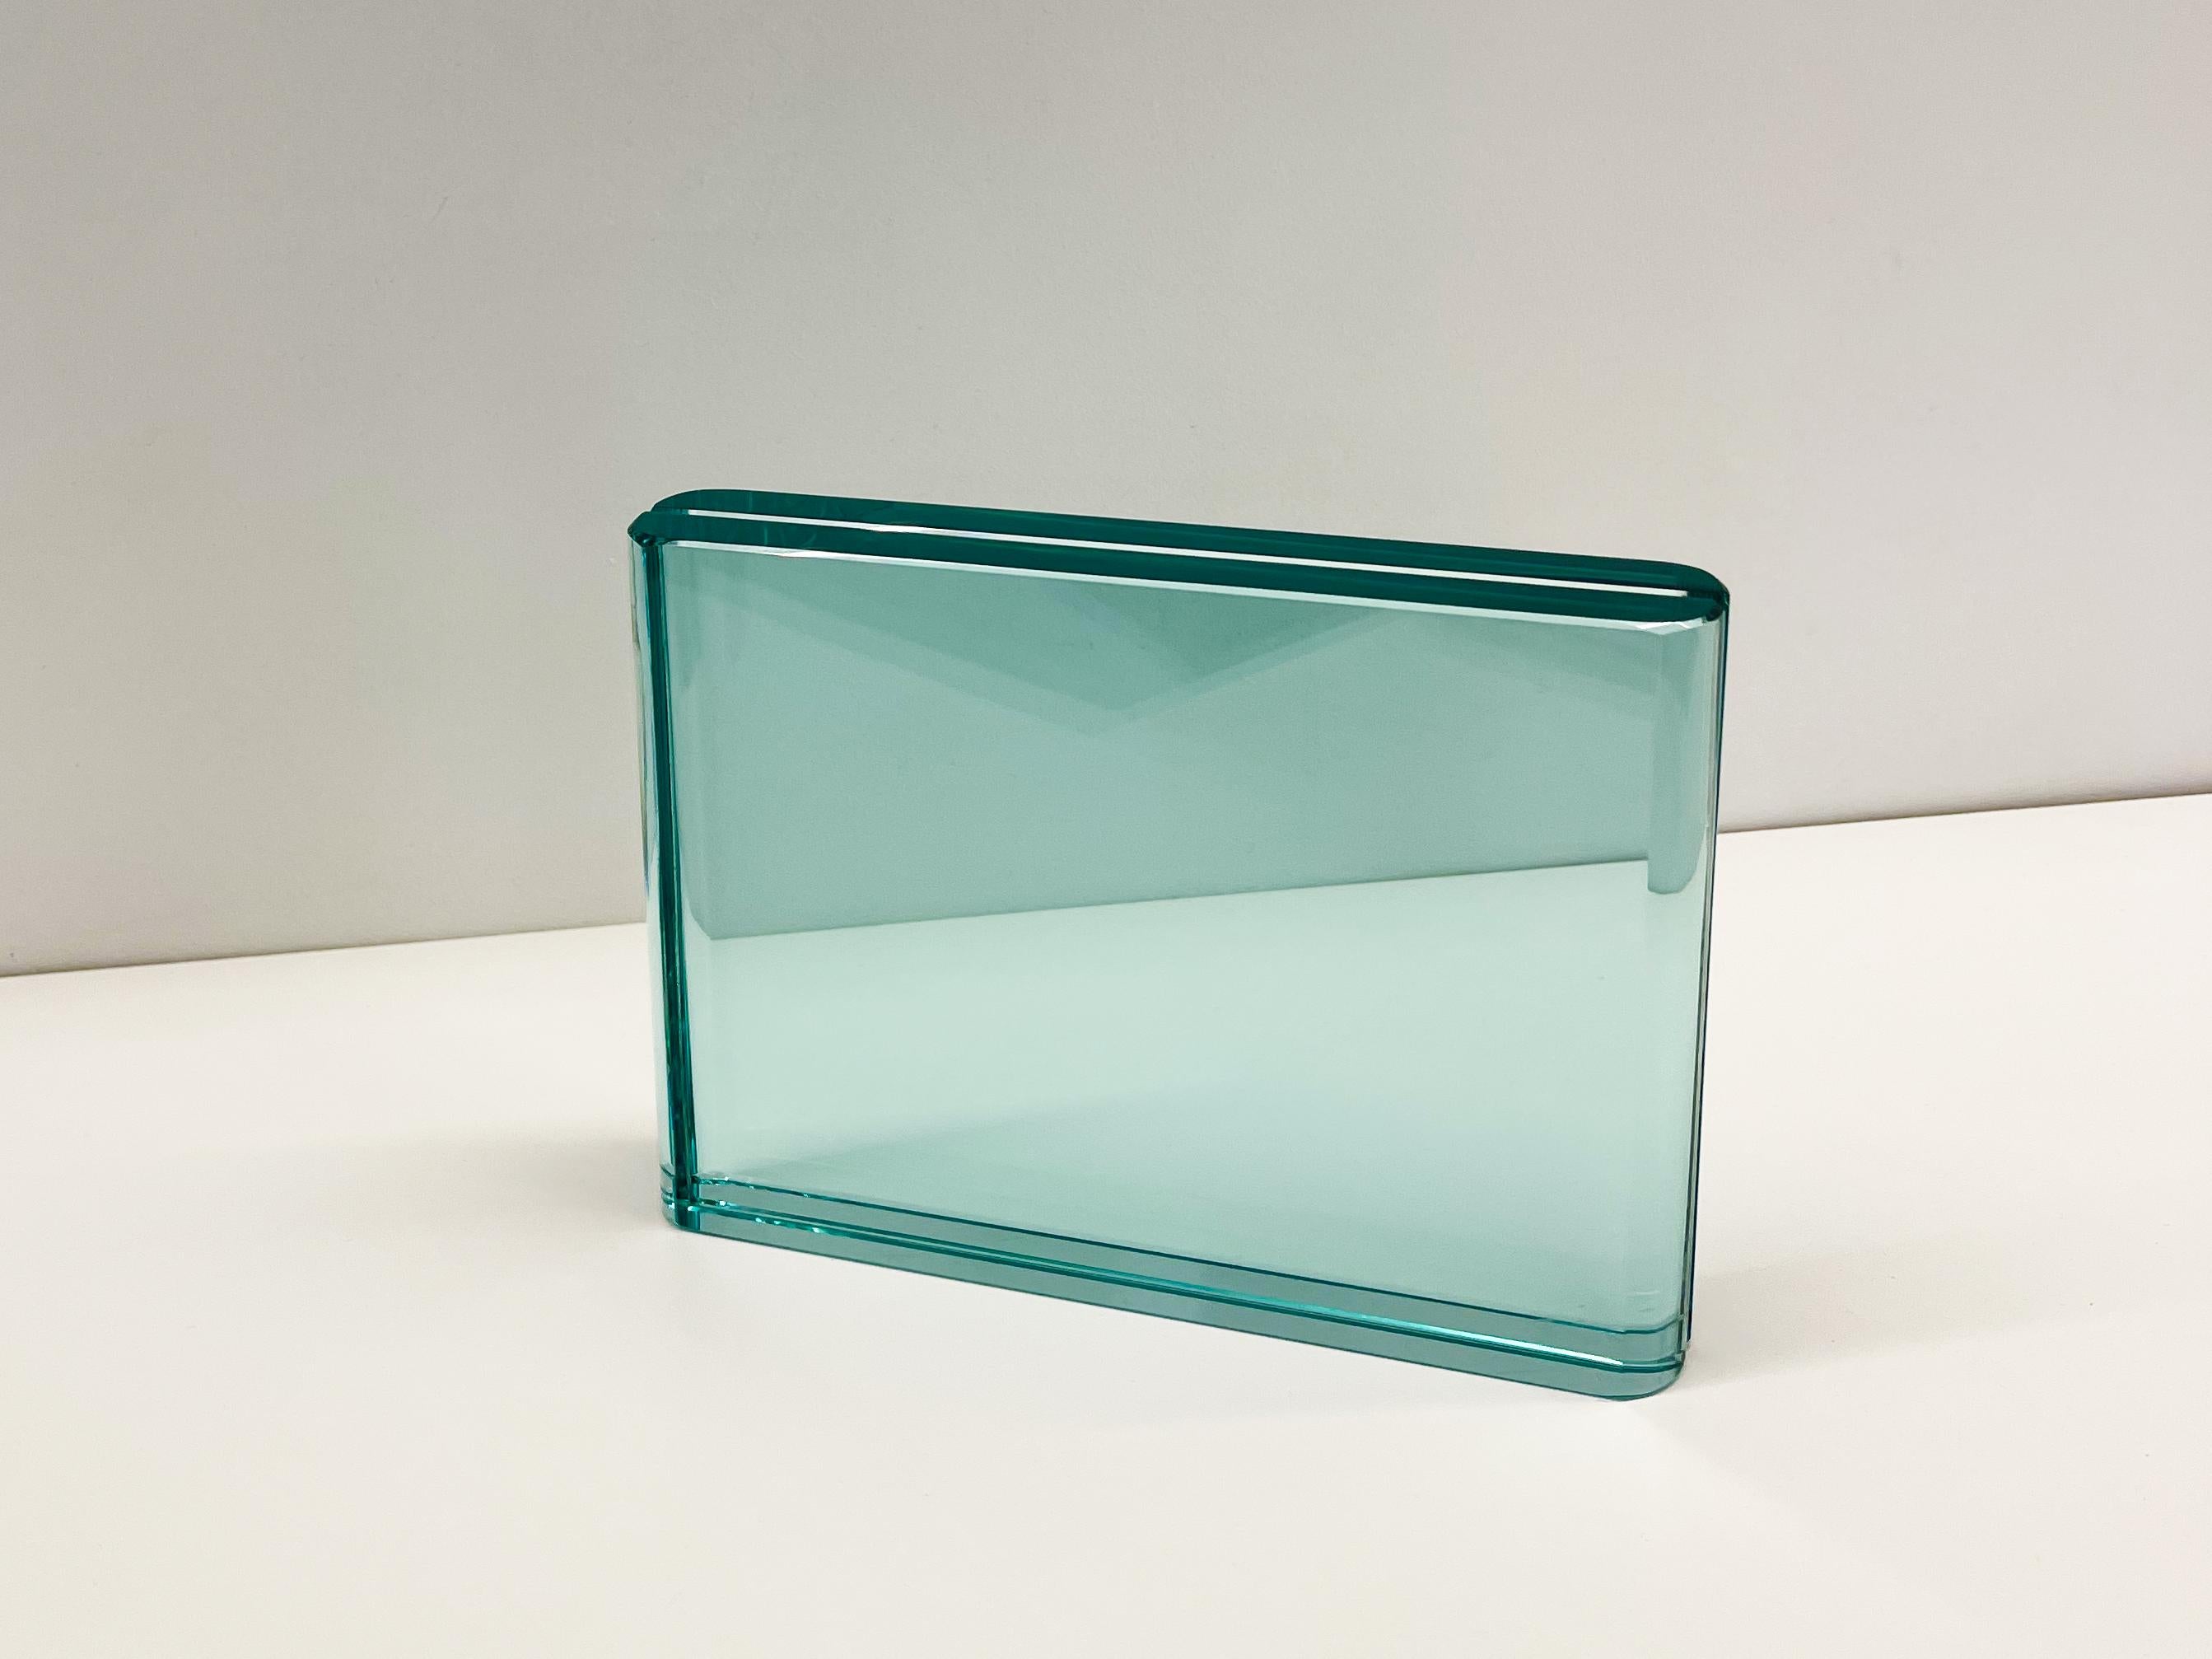 2021 Collection of picture frames by Ghirò Studio.
Picture frame of excellent workmanship and artistic quality.
The rounded edges give harmony and elegance.
The high transparency crystal has very bright aquamarine reflections. Being worked